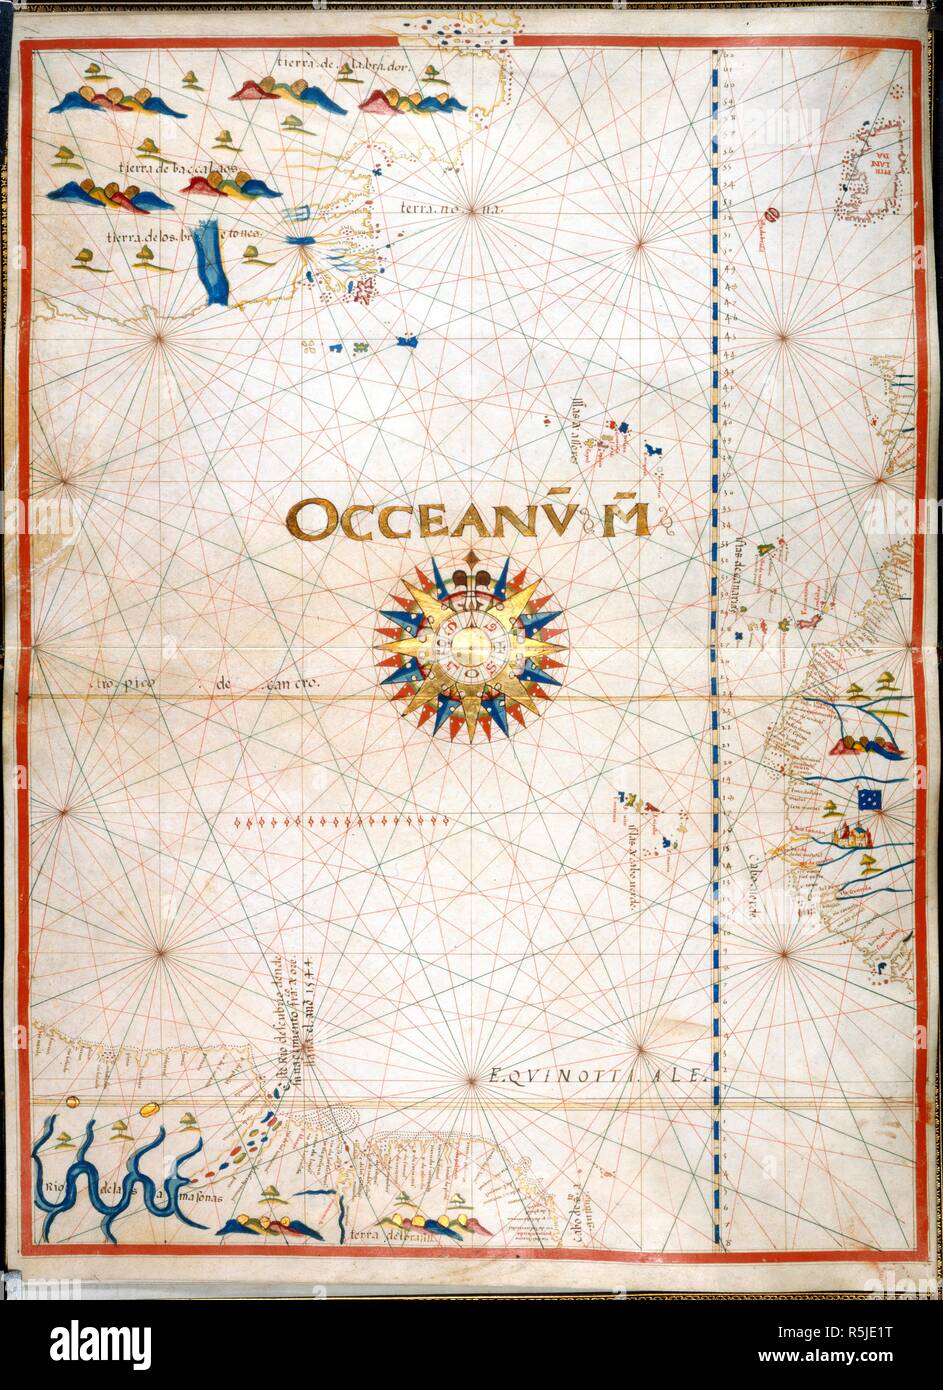 Chart of the Atlantic Ocean. Portolano. Spain; before 1600. [Whole chart] Chart of the Atlantic Ocean, with Ireland, Portugal, and part of the west coast of Africa, including the Azores, Madeira, Canary Islands, and Cape Verde Islands. The western Atlantic is bound by the east coast of North America including Labrador, and the north-east coast of South America, with the Amazon River  Image taken from Portolano.  Originally published/produced in Spain; before 1600. . Source: Add. 9814, No. 9. Language: Spanish. Stock Photo